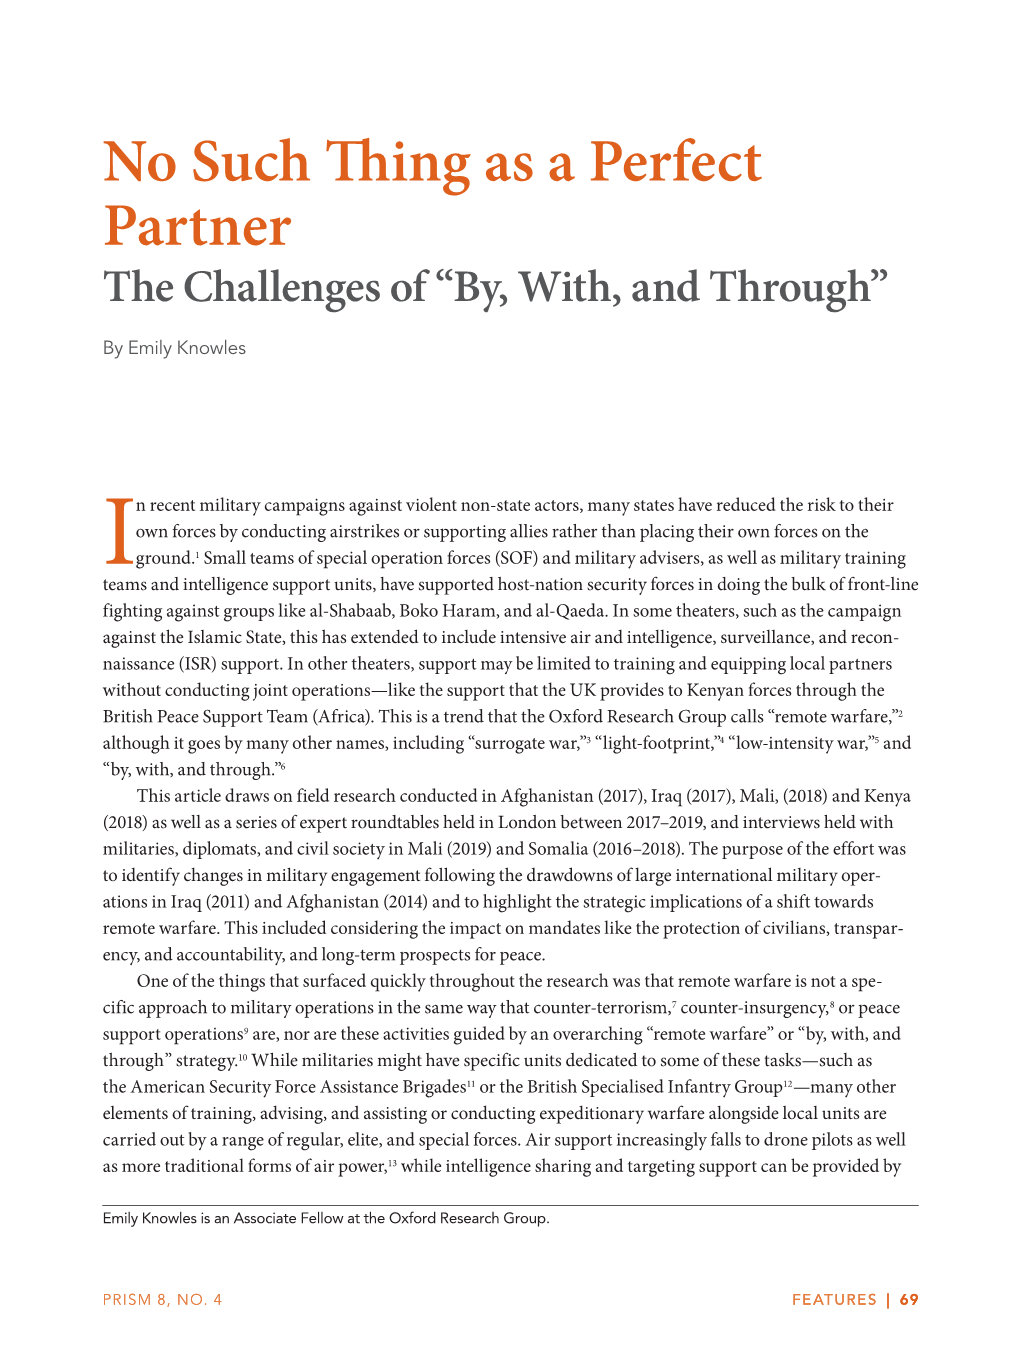 No Such Thing As a Perfect Partner the Challenges of “By, With, and Through”